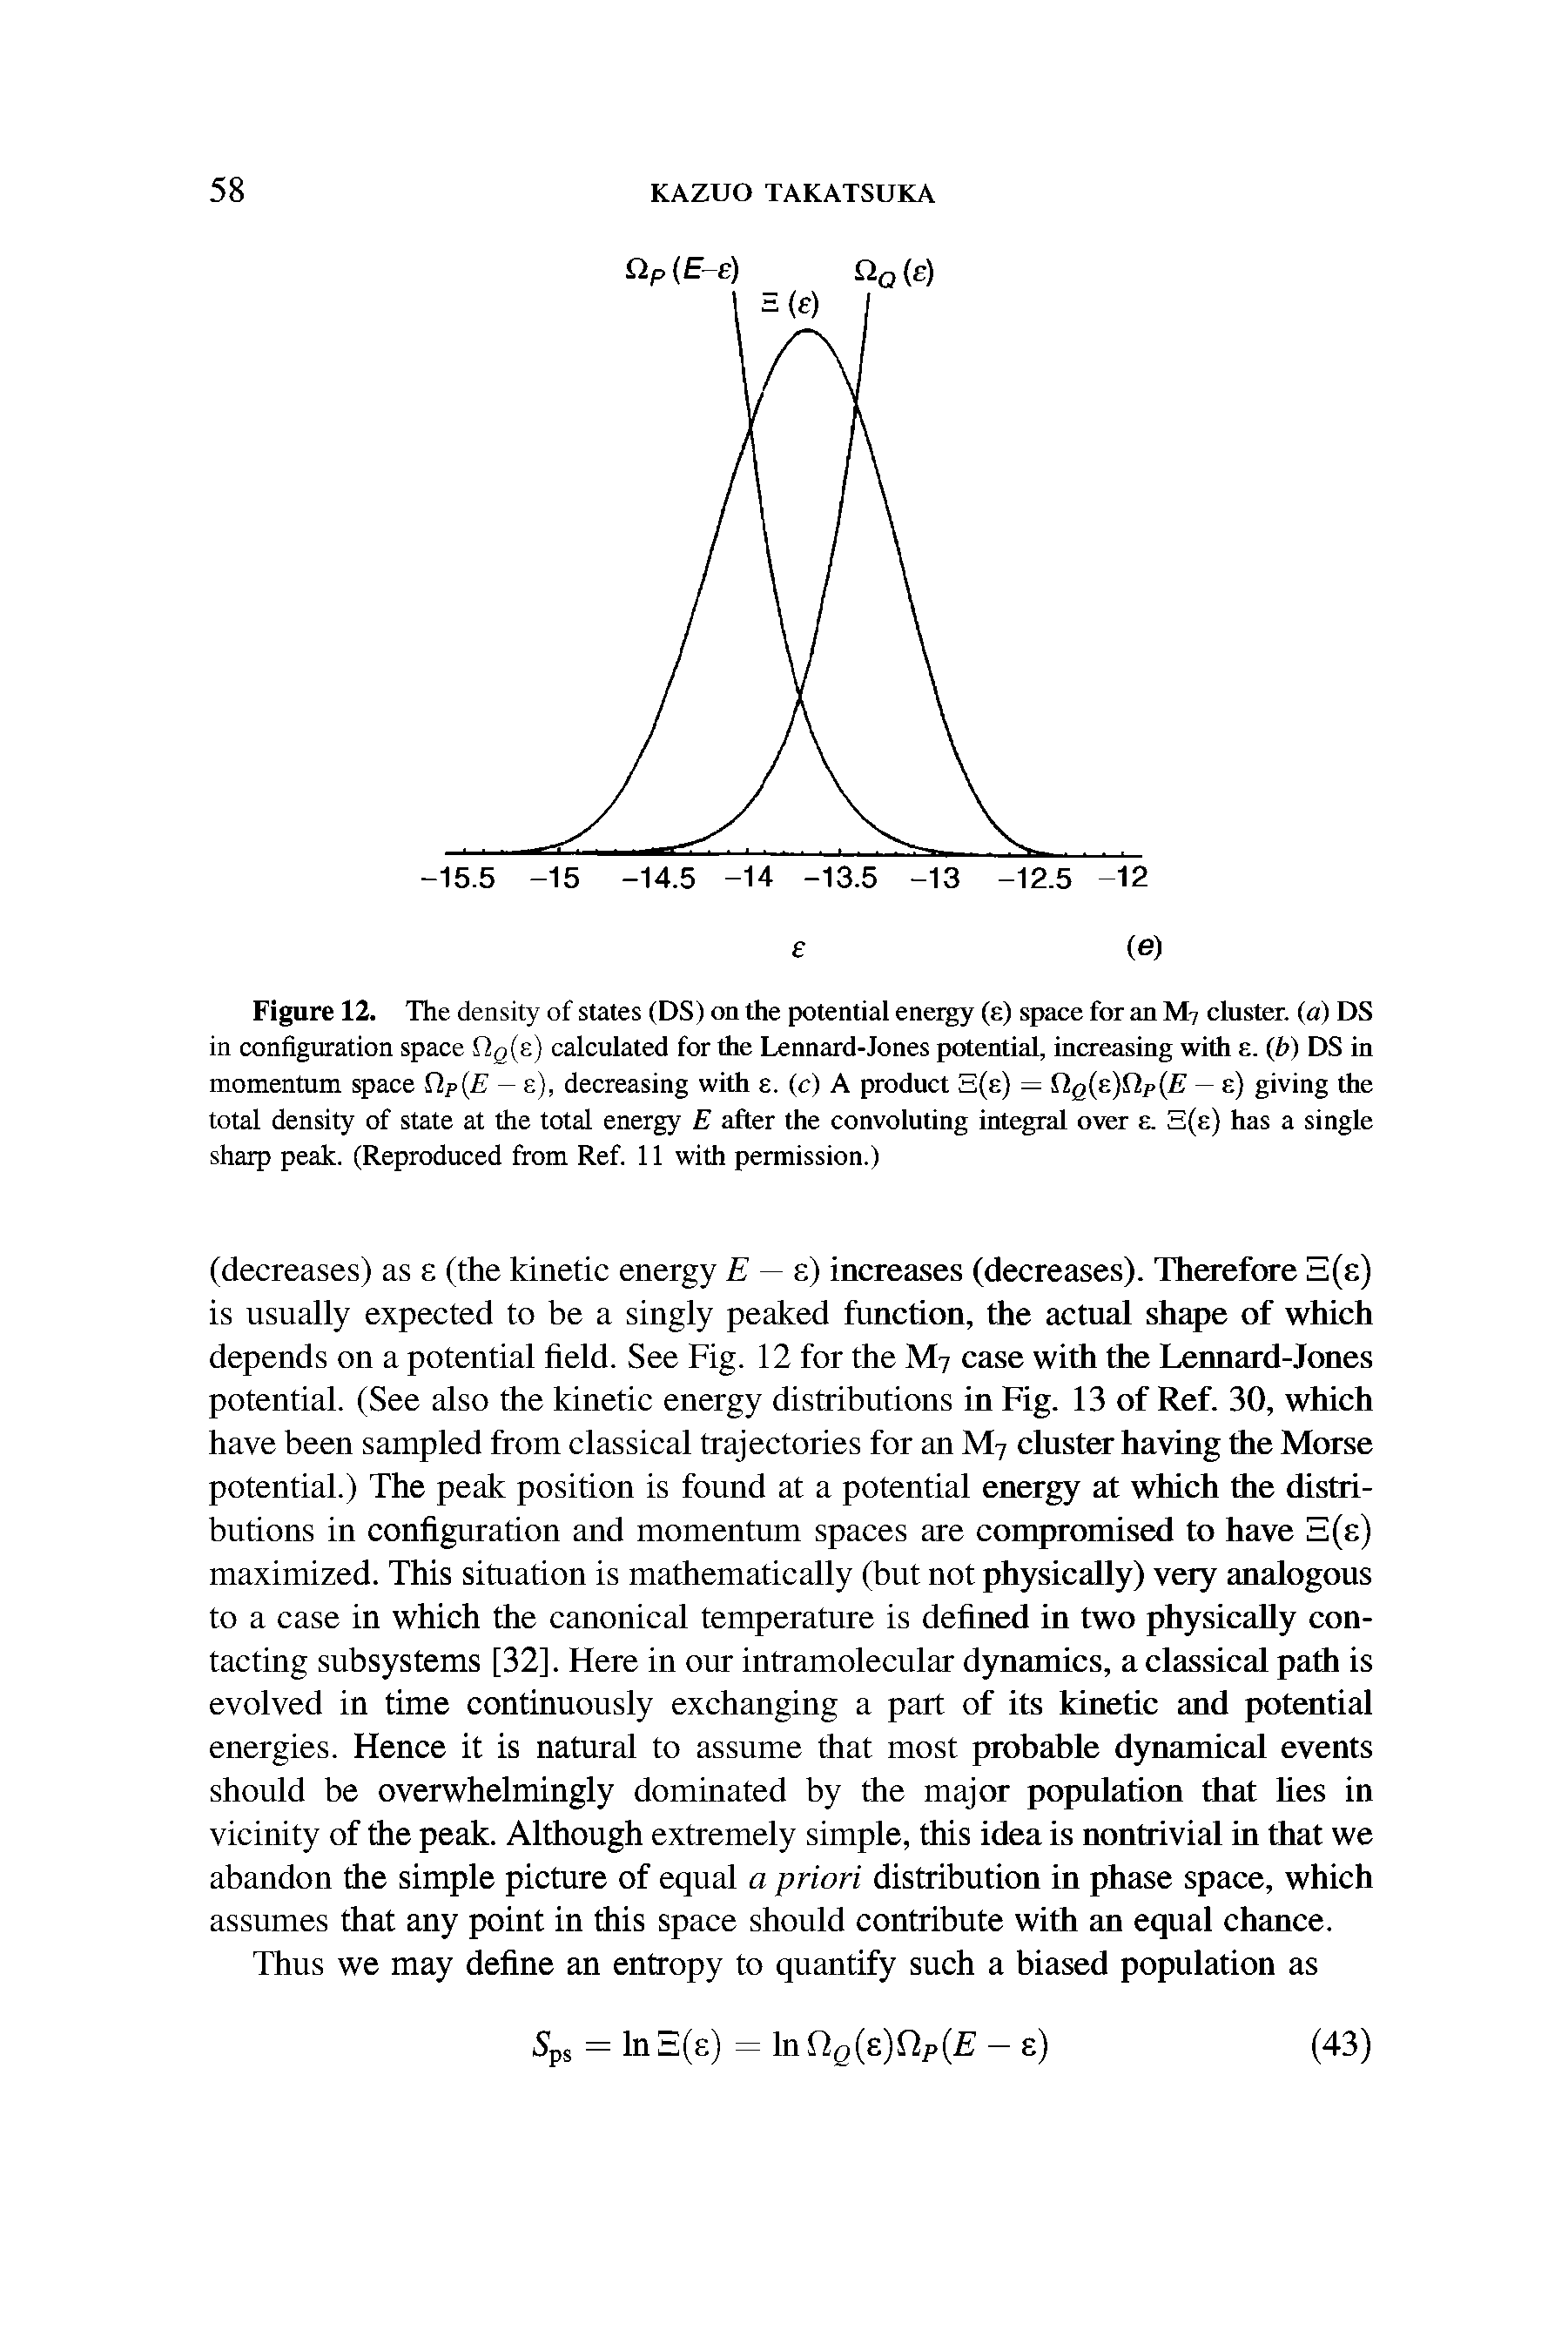 Figure 12. The density of states (DS) on the potential energy (e) space for an M7 cluster, (a) DS in configuration space f2g(s) calculated for the Lennard-Jones potential, increasing with 8. (b) DS in momentum space (1p(E — s), decreasing with 8. (c) A product 3(e) = Qq(e)Qp(E — e) giving the total density of state at the total energy E after the convoluting integral over 8. 3(8) has a single sharp peak. (Reproduced from Ref. 11 with permission.)...